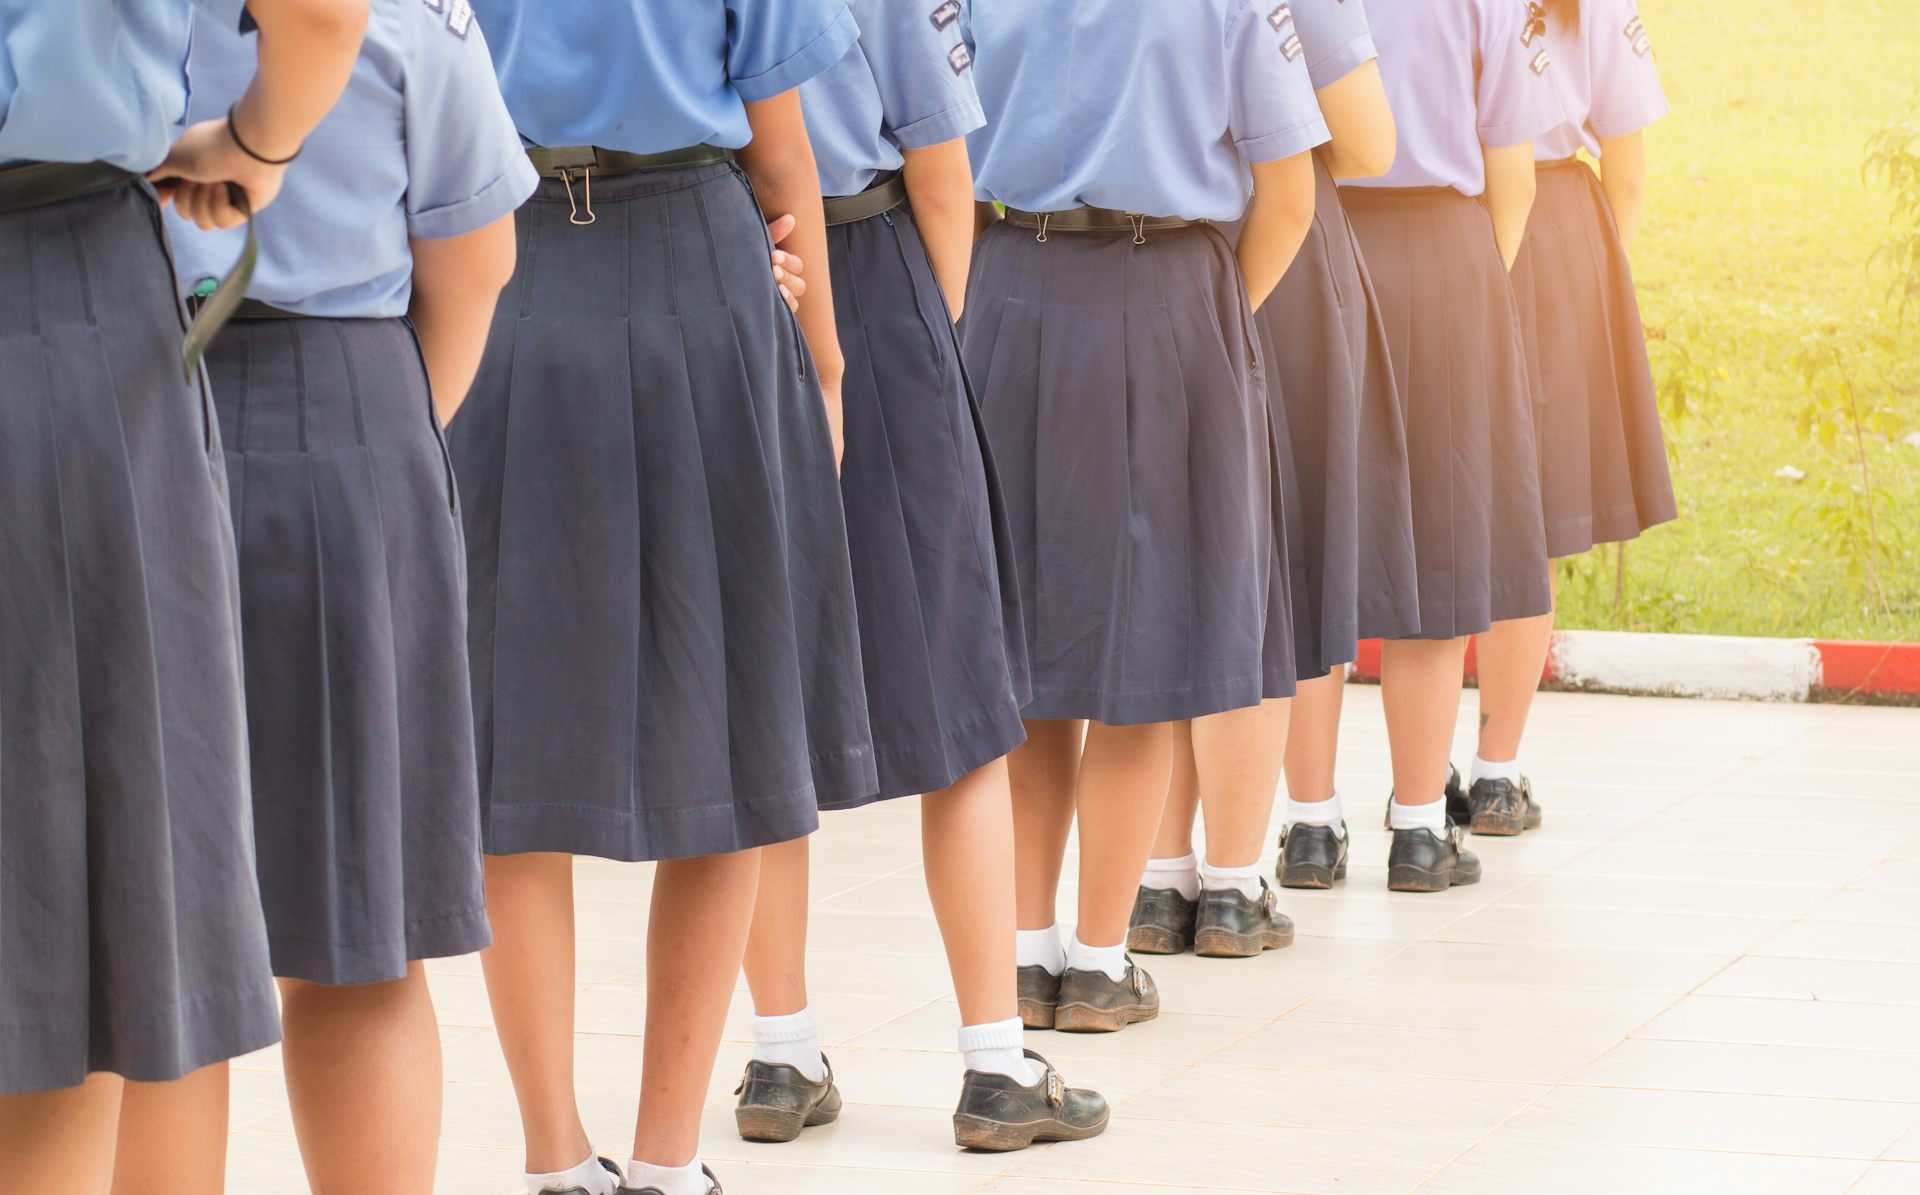 Why do we still make girls wear skirts and dresses as school uniform?